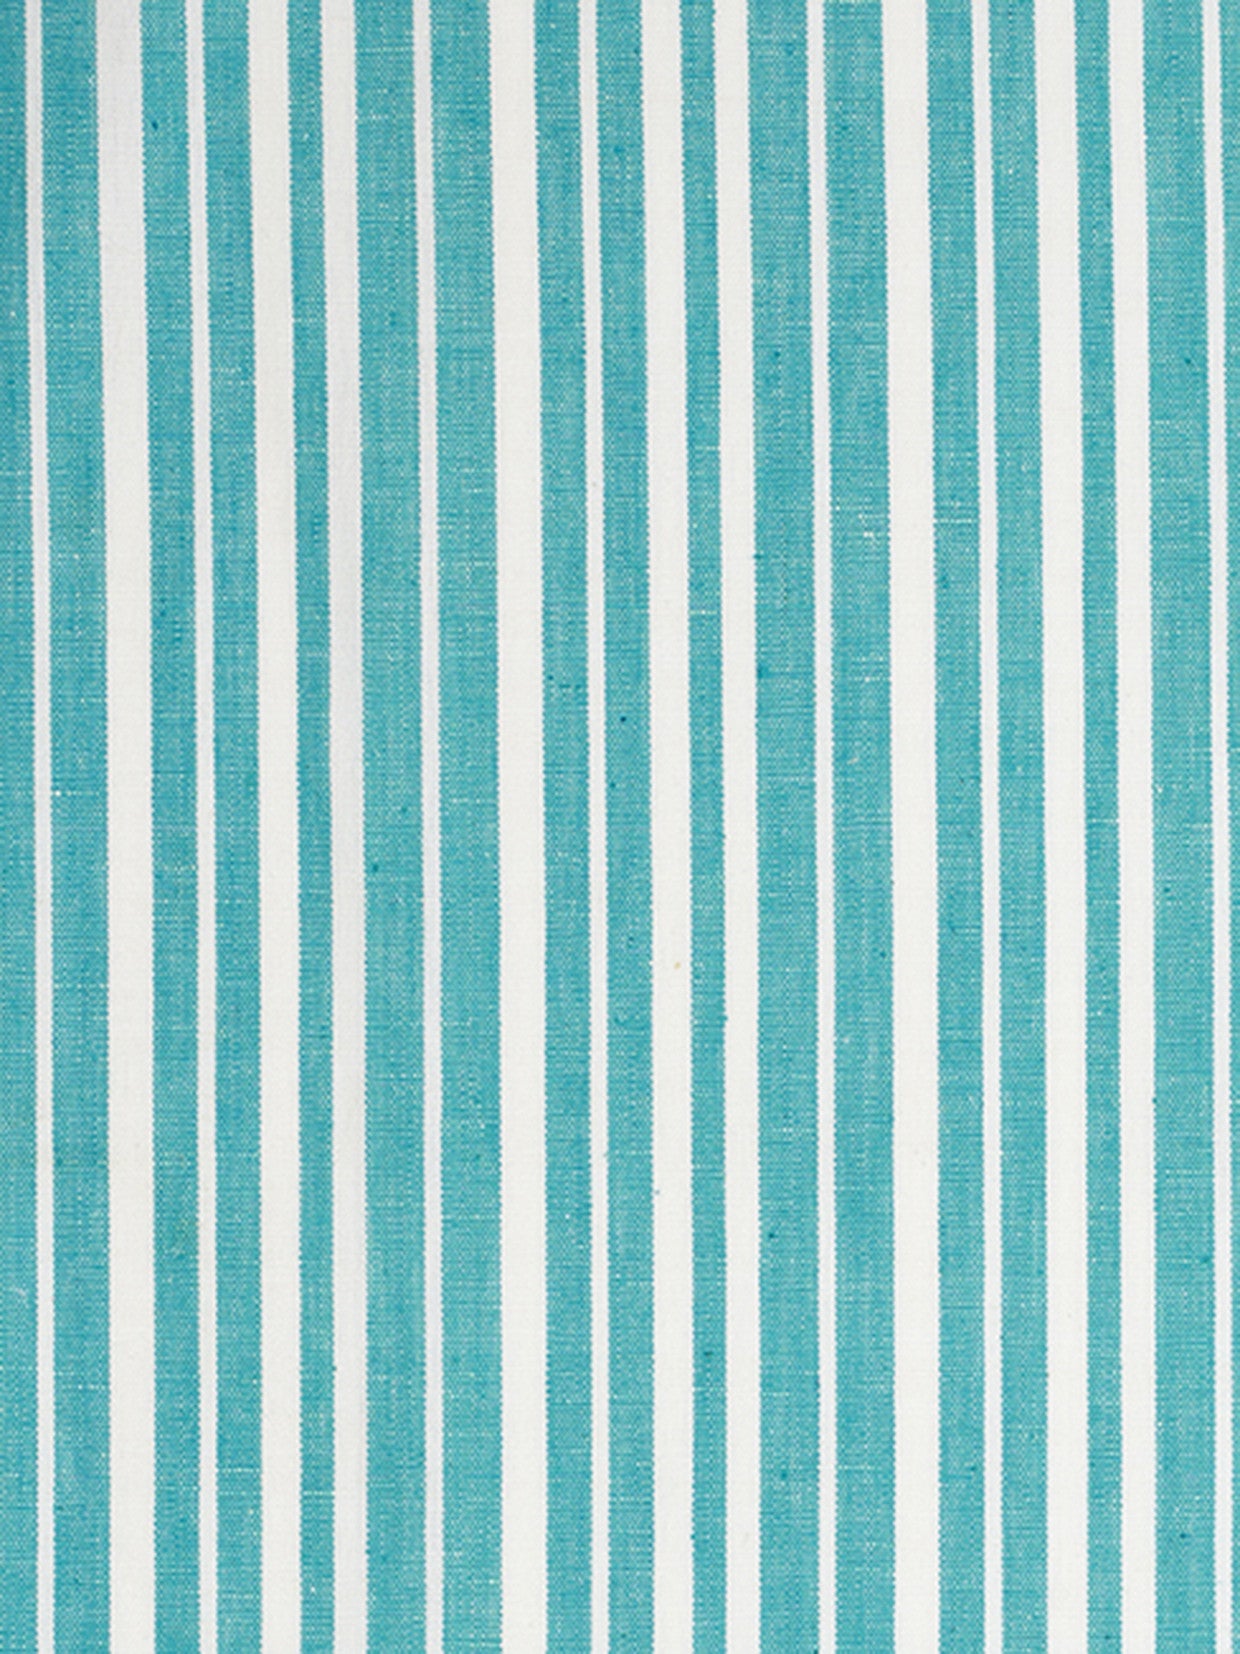 Palermo Ticking Stripe Home Decor Fabric by the Meter Stone Grey 